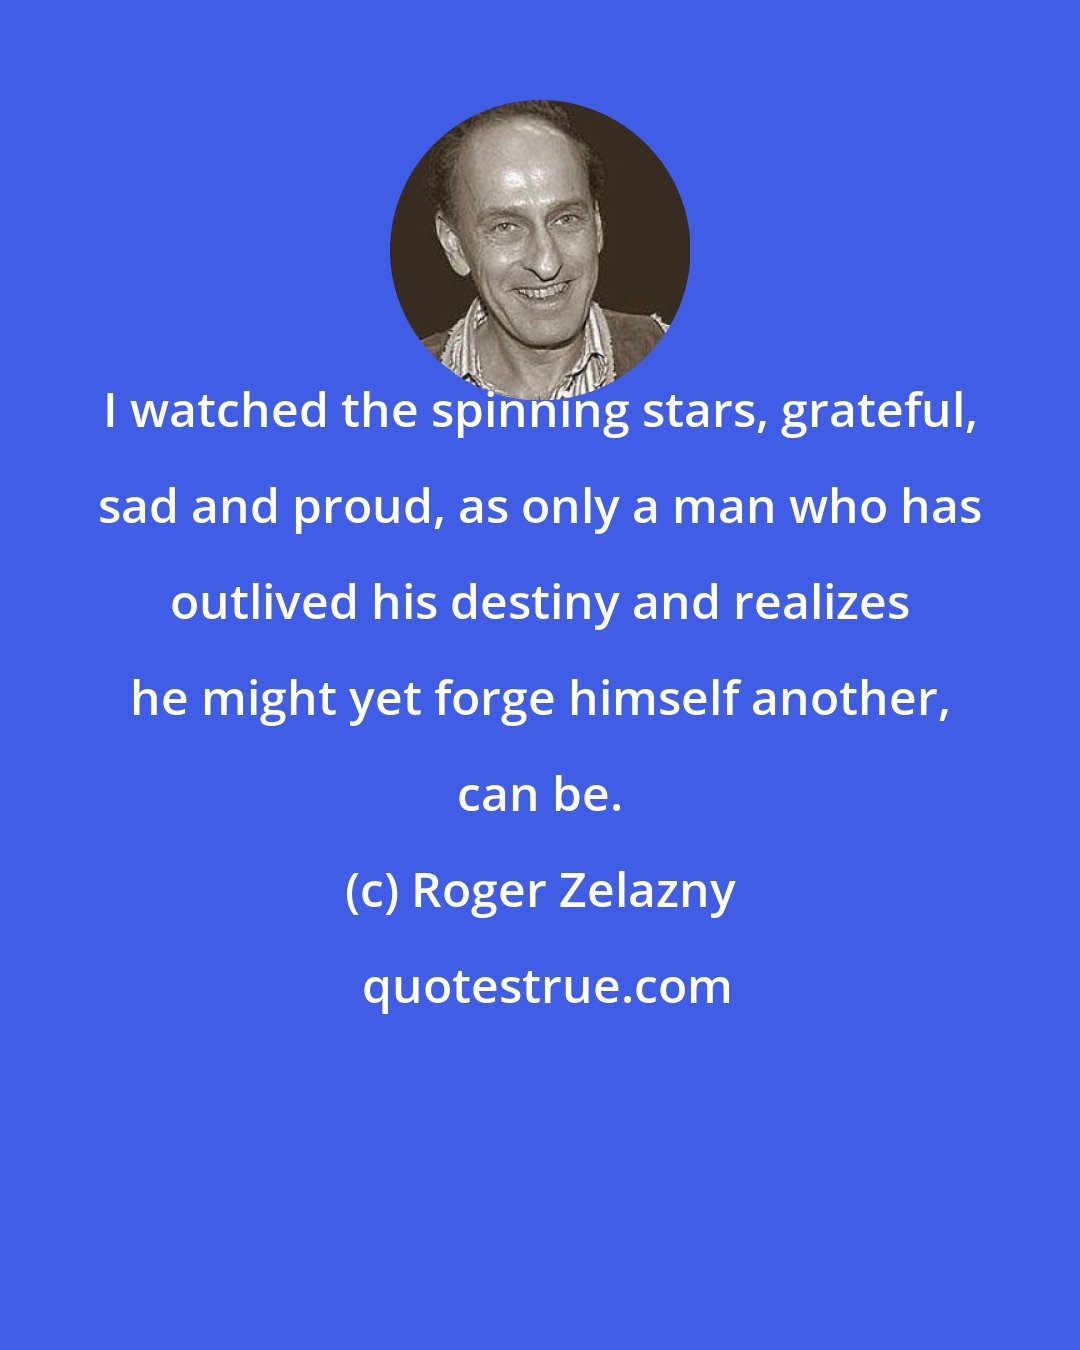 Roger Zelazny: I watched the spinning stars, grateful, sad and proud, as only a man who has outlived his destiny and realizes he might yet forge himself another, can be.